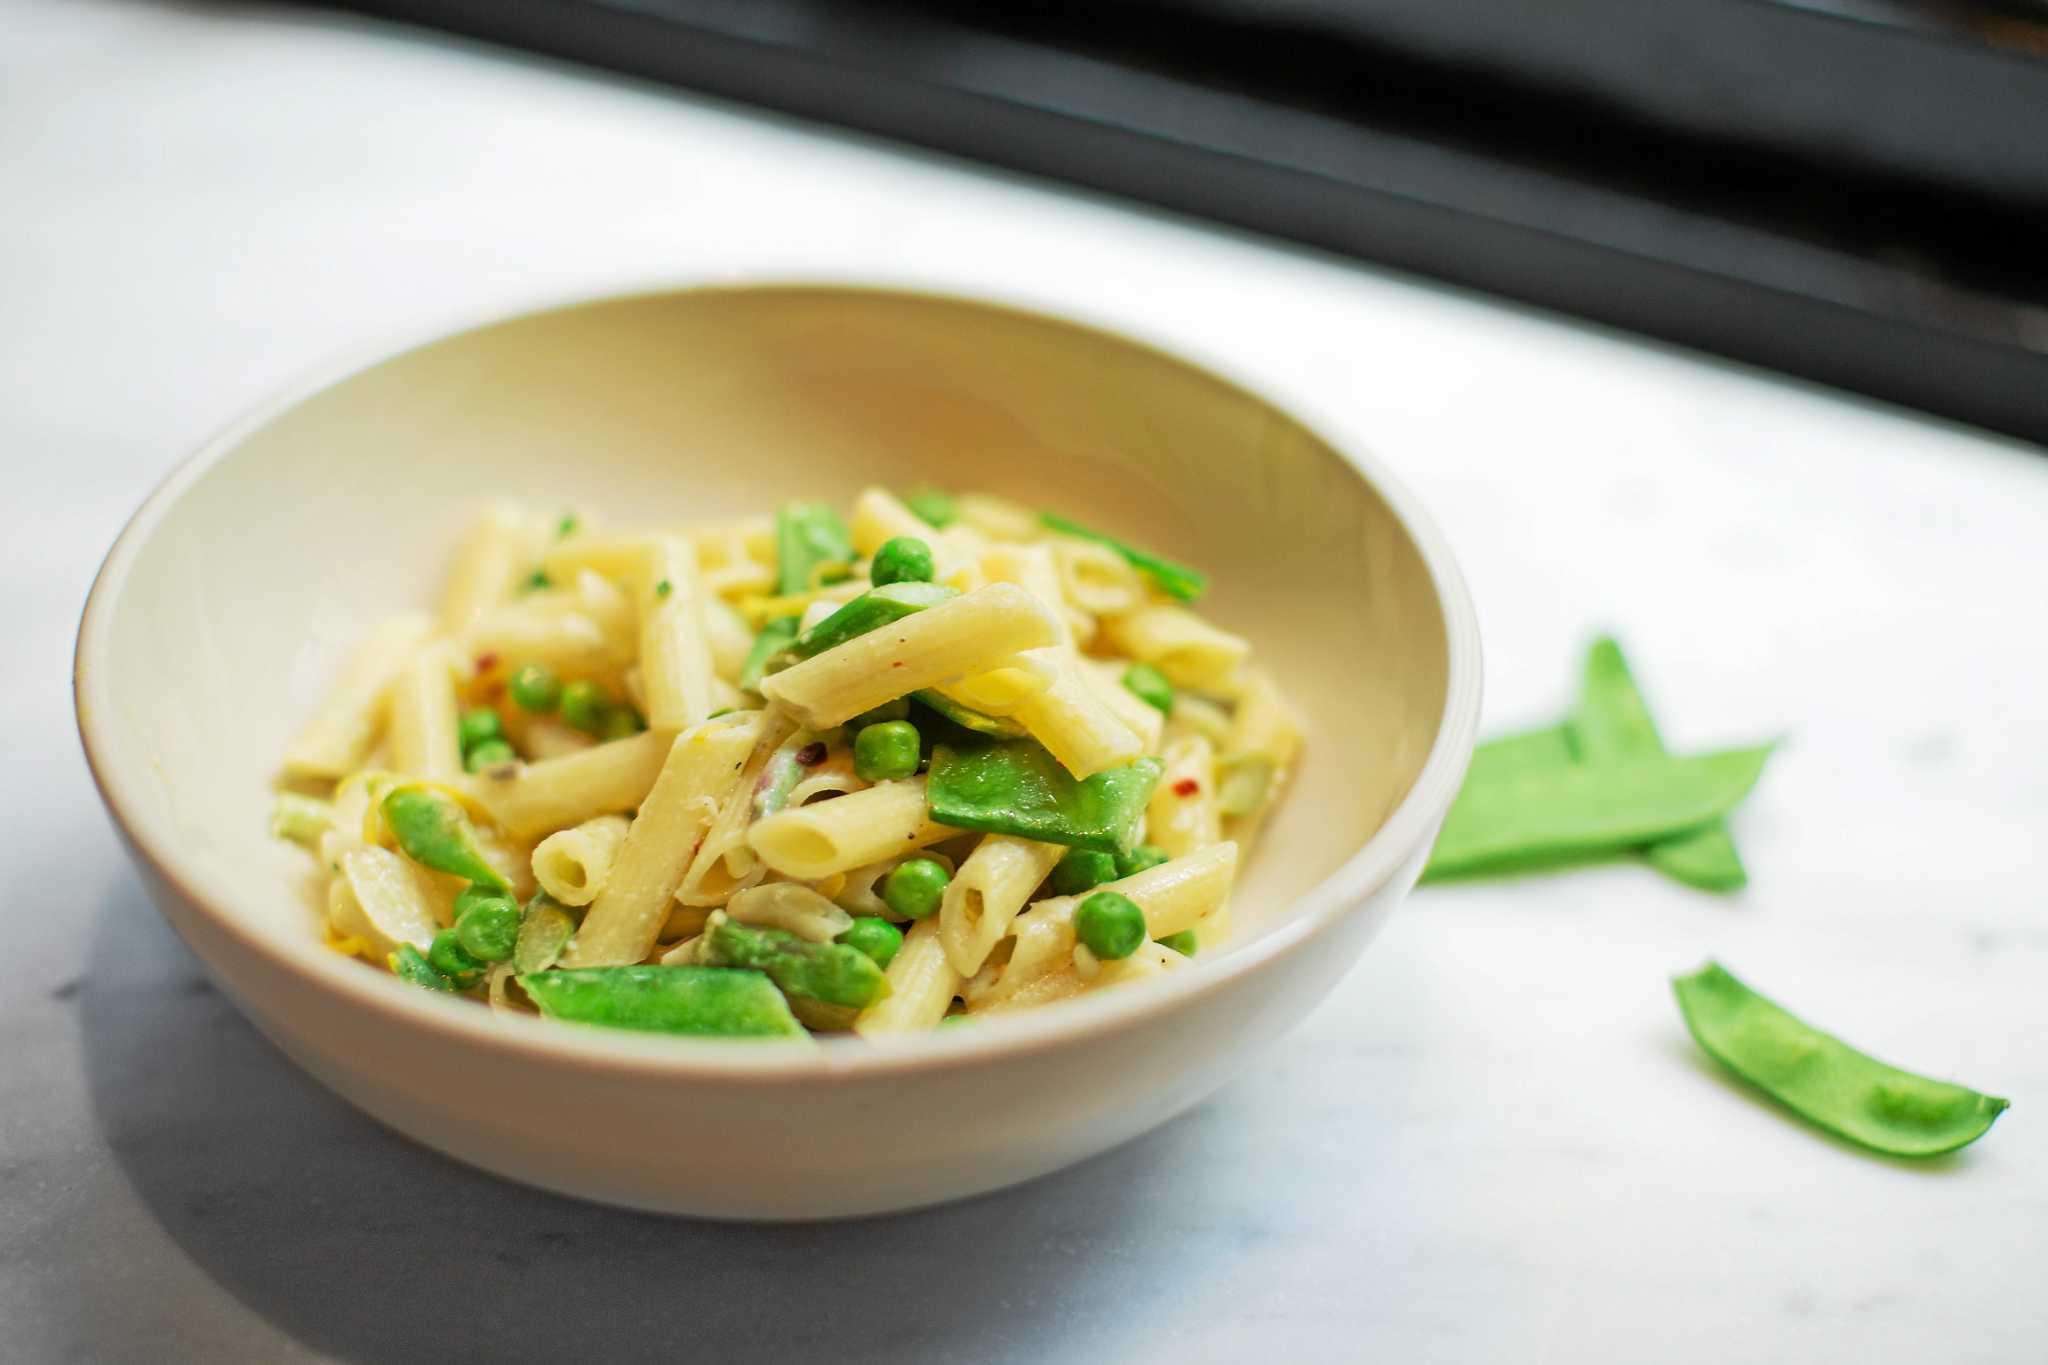 Mario Batali's Chilled Penne Pasta With Asparagus and Peas